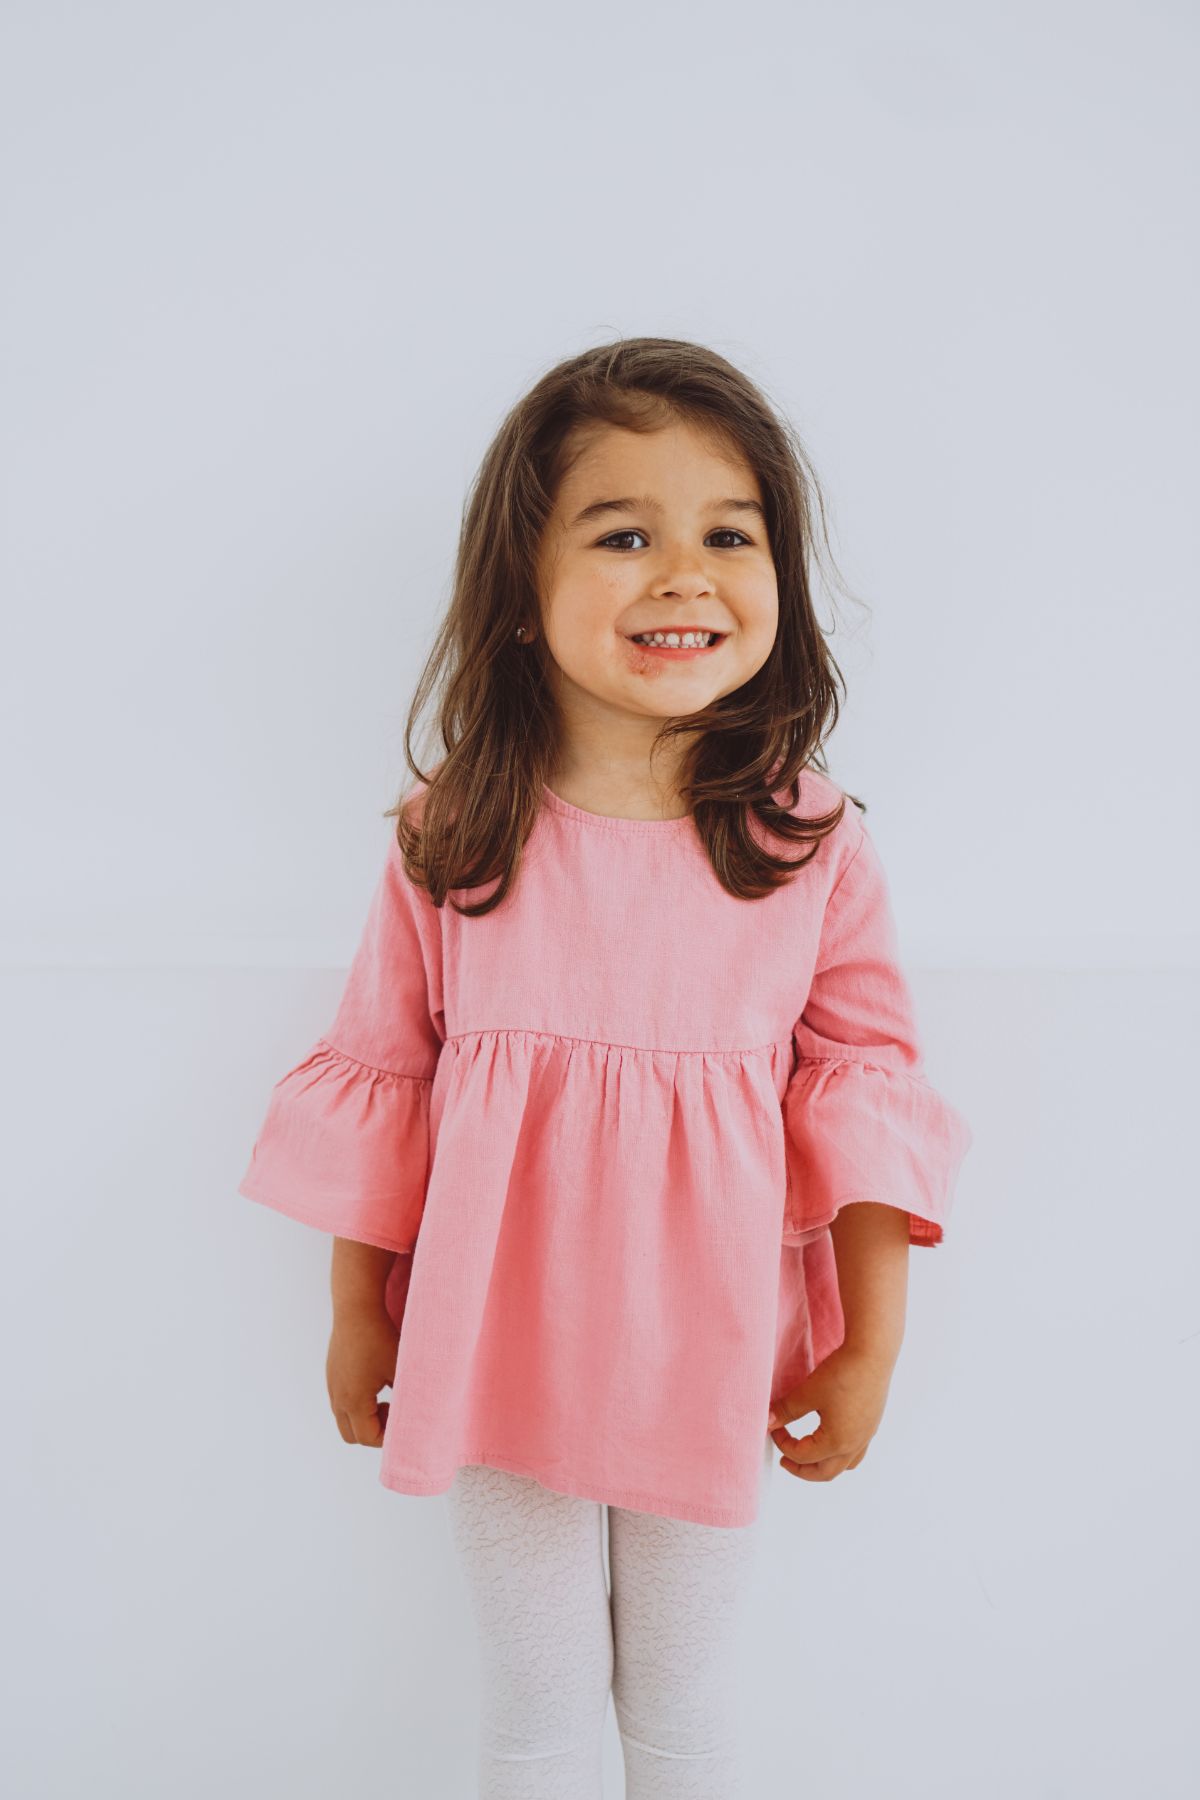 Little brunette girl in pink shirt smiling and standing by gray background.